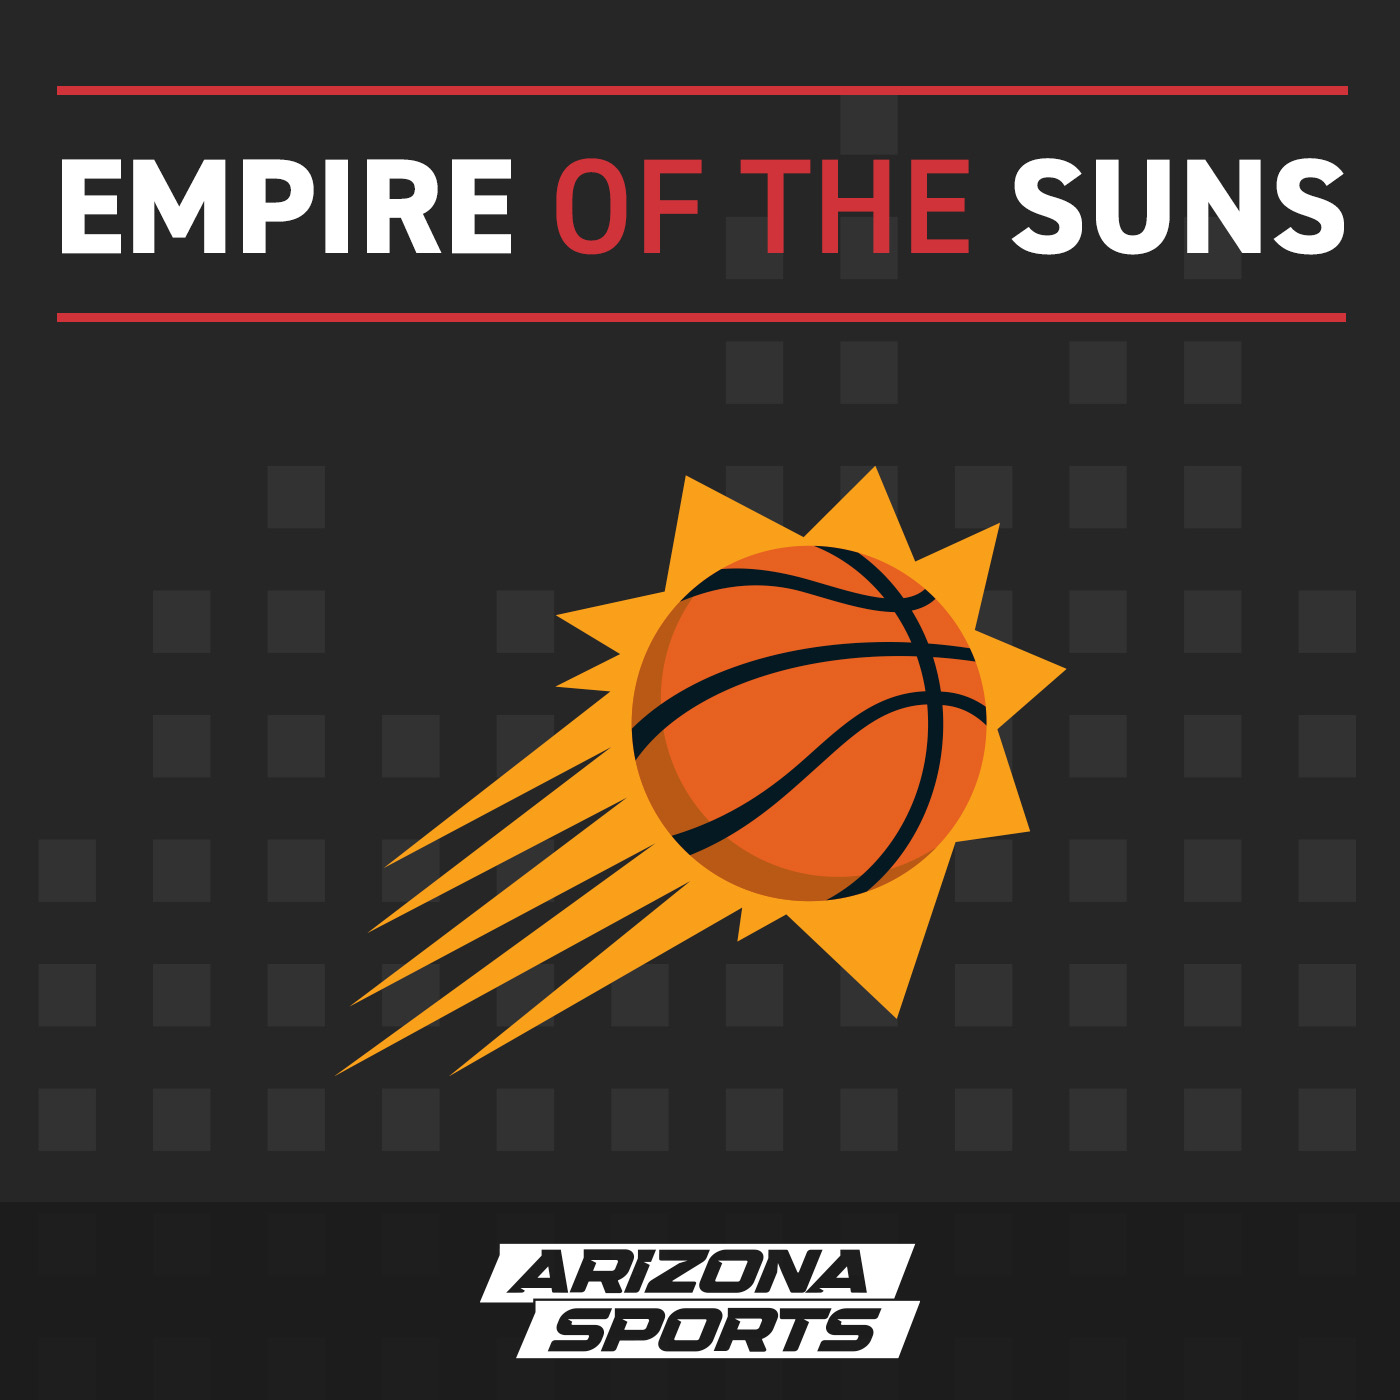 How concerned are we about the Suns with 3 games left? - May 12